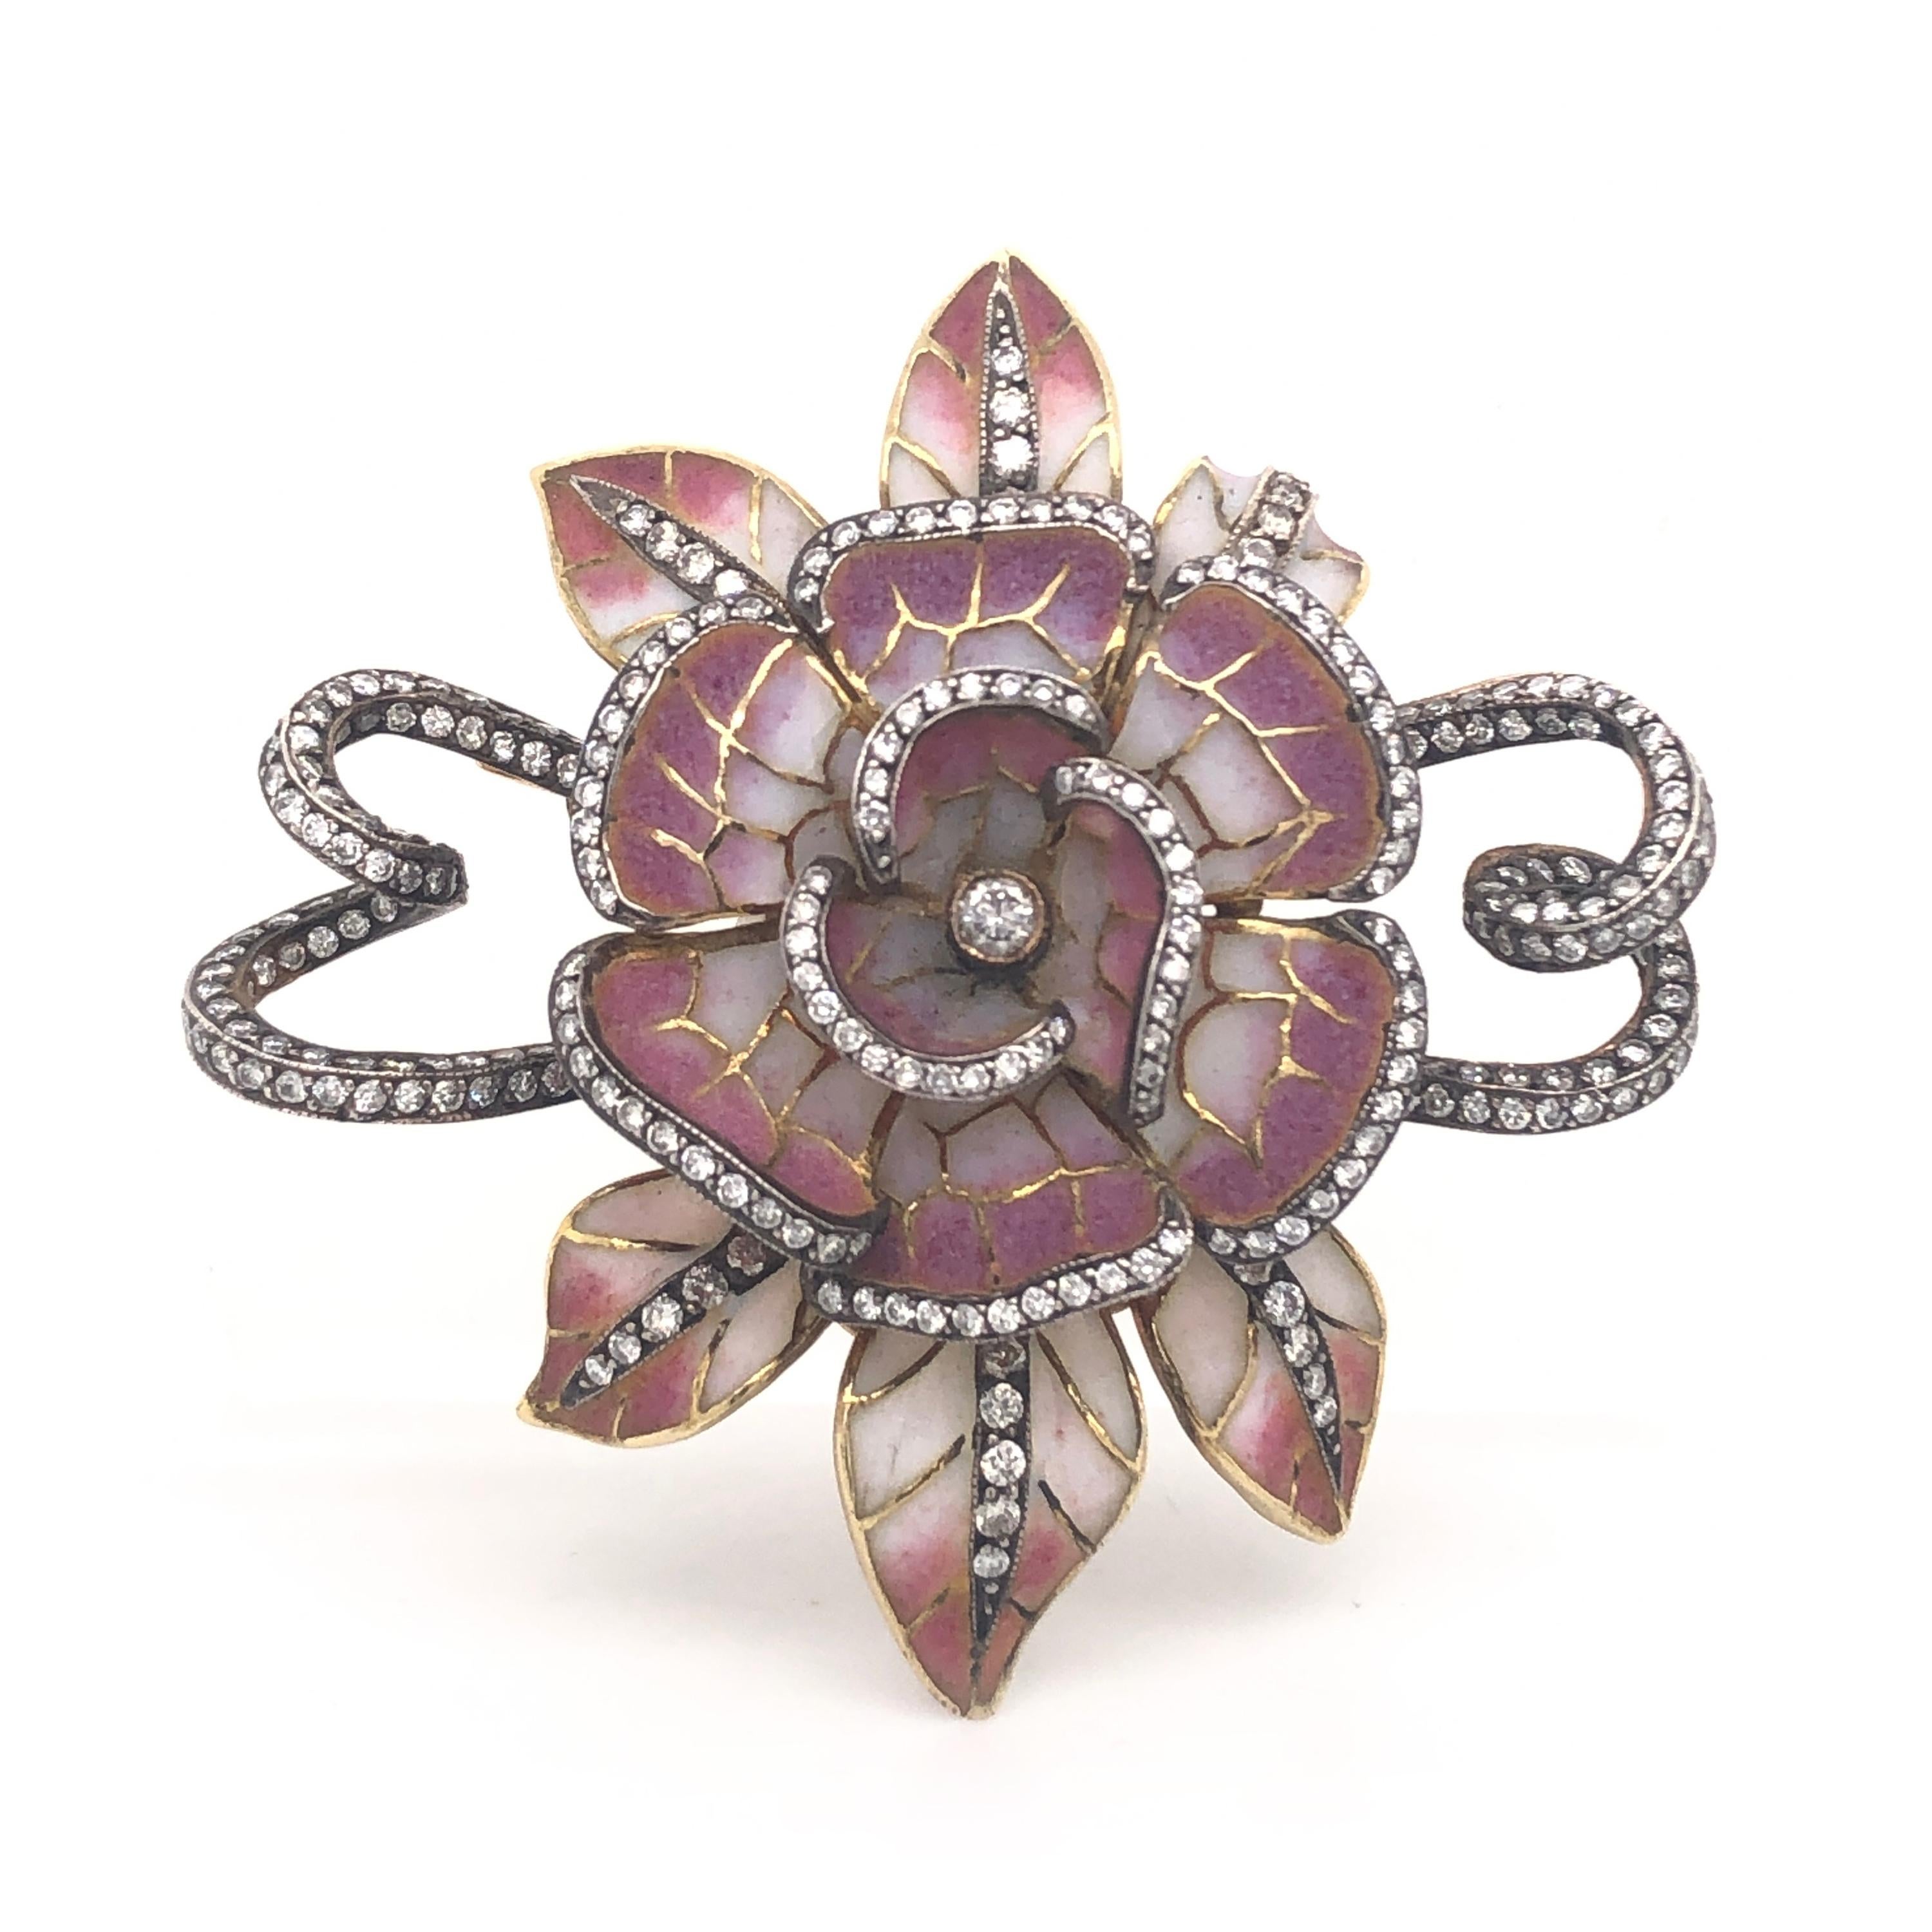 A Moira flower head brooch with pink and white plique à jour enamel and round brilliant-cut diamonds, with swirling ribbon, pavé set with diamonds. Signed Moira, numbered 5102.